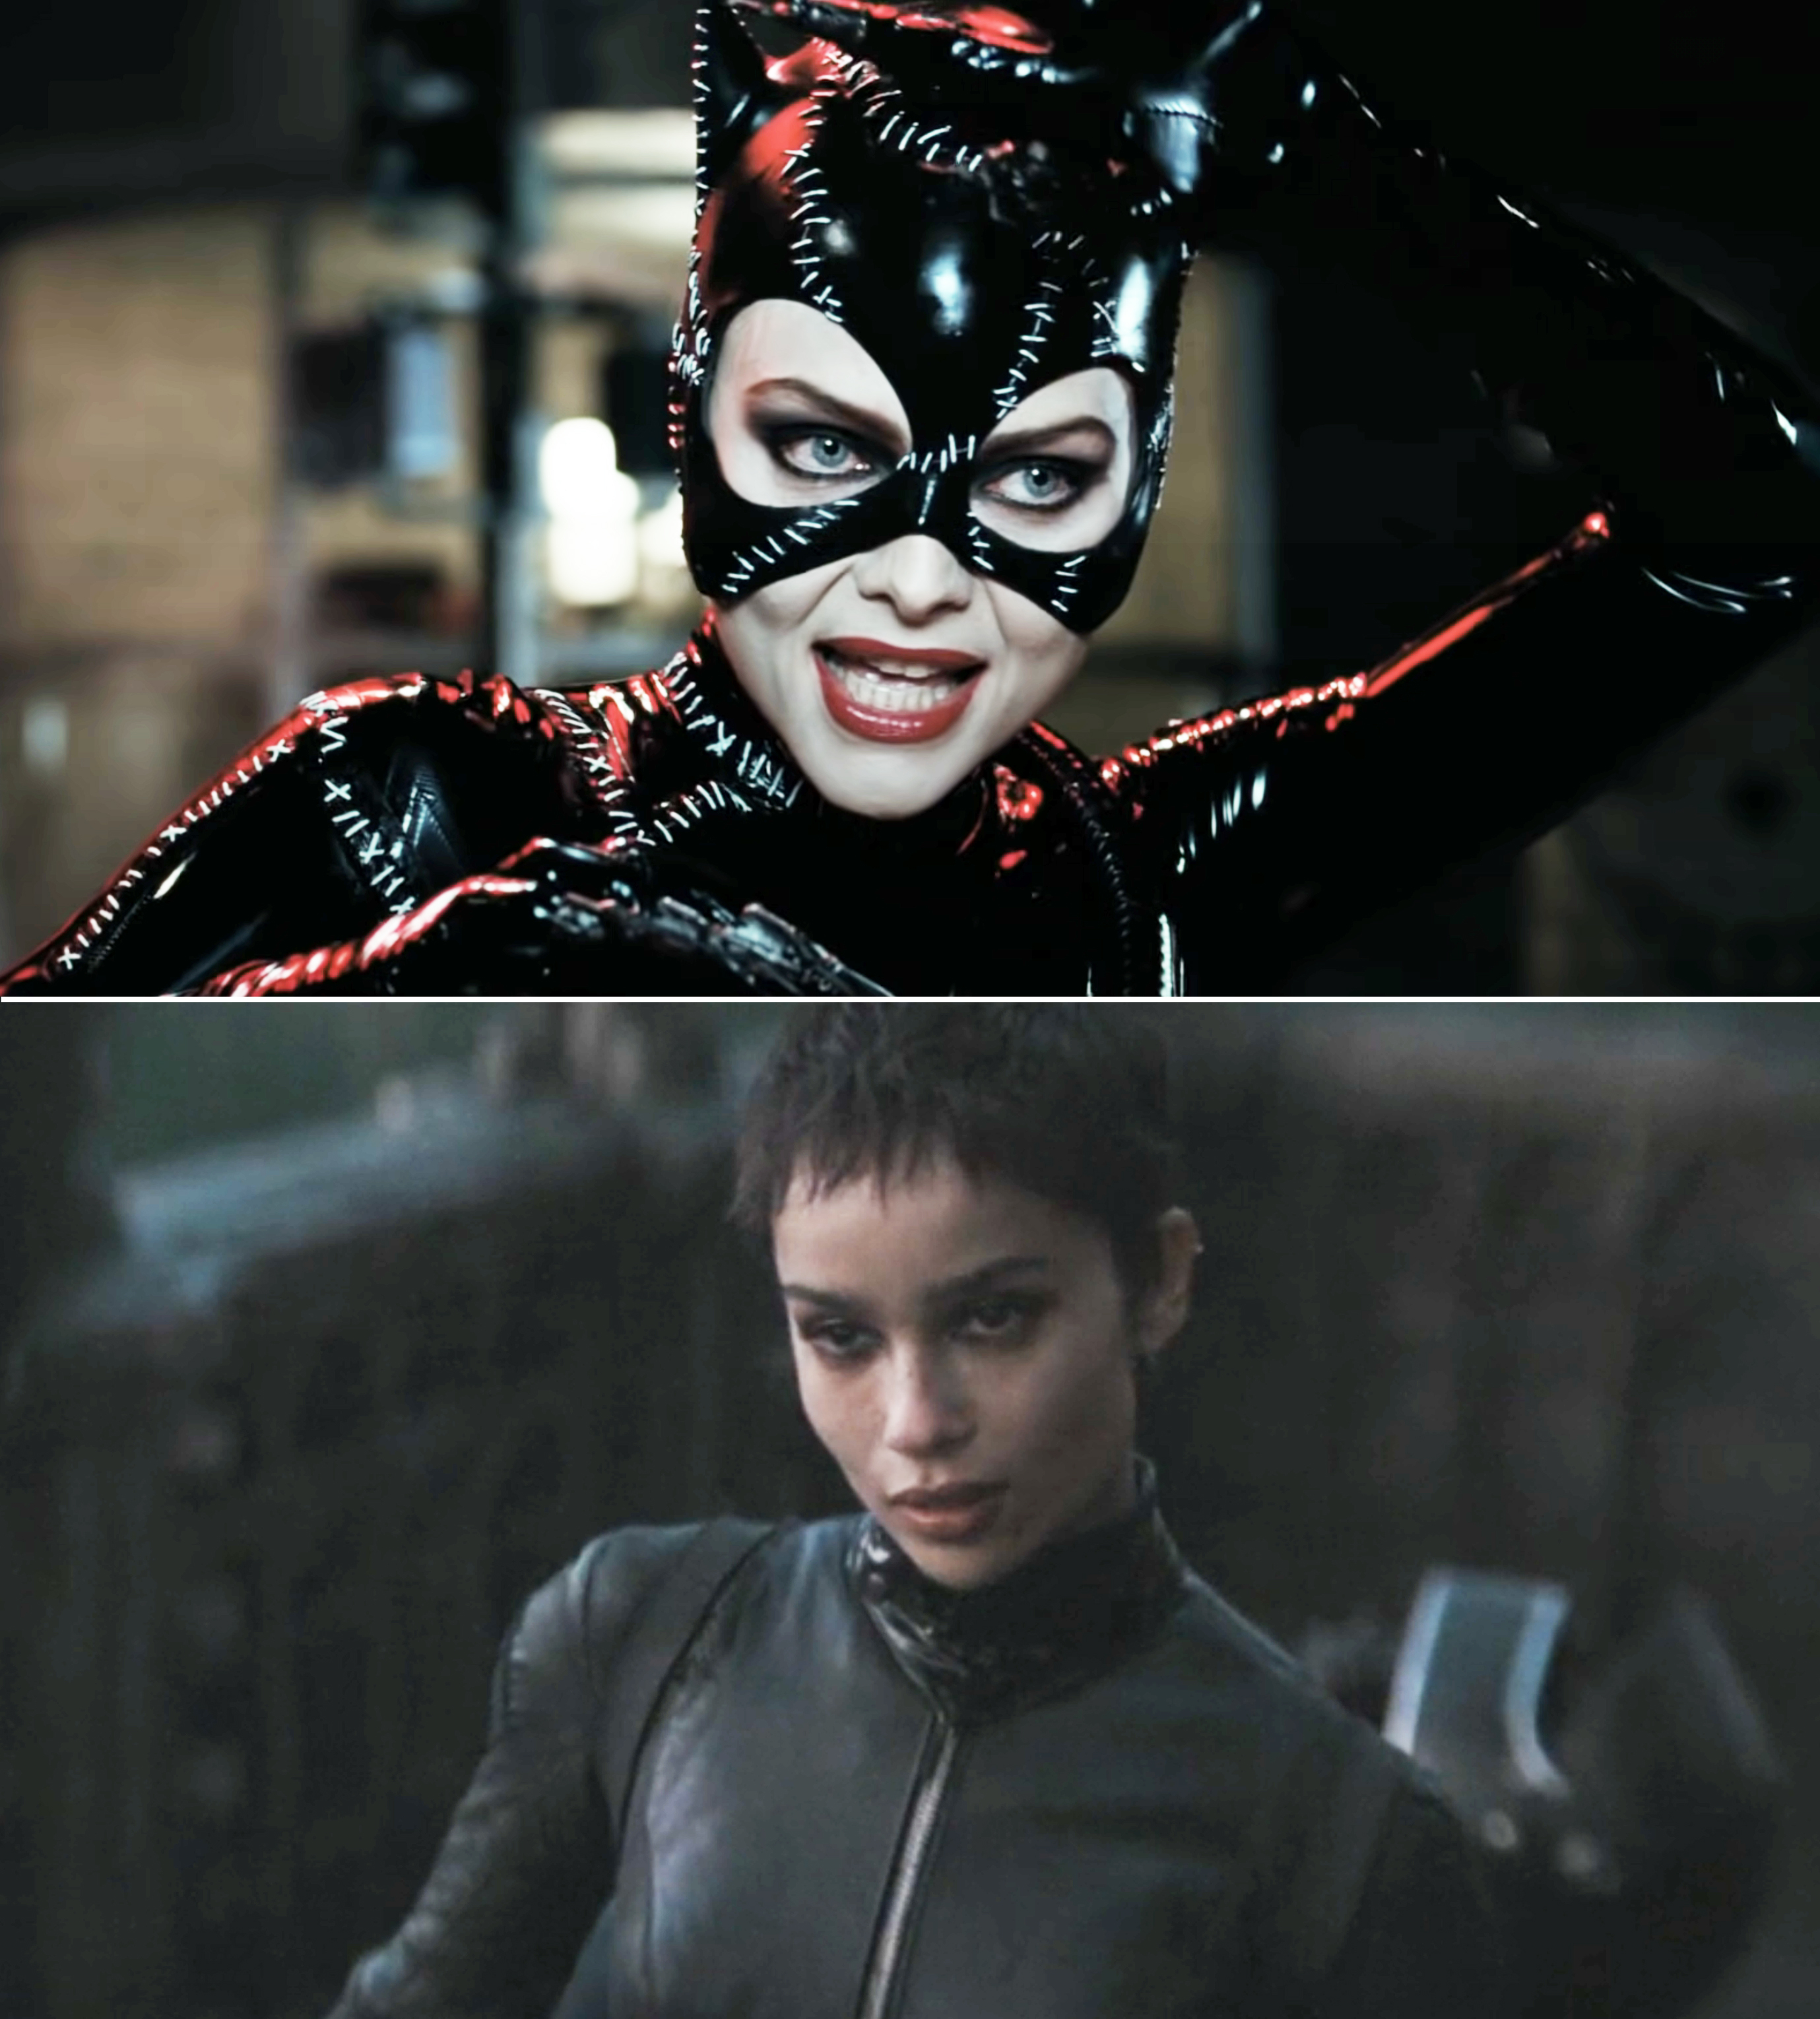 Michelle, wearing a mask, and Zoë as Catwoman